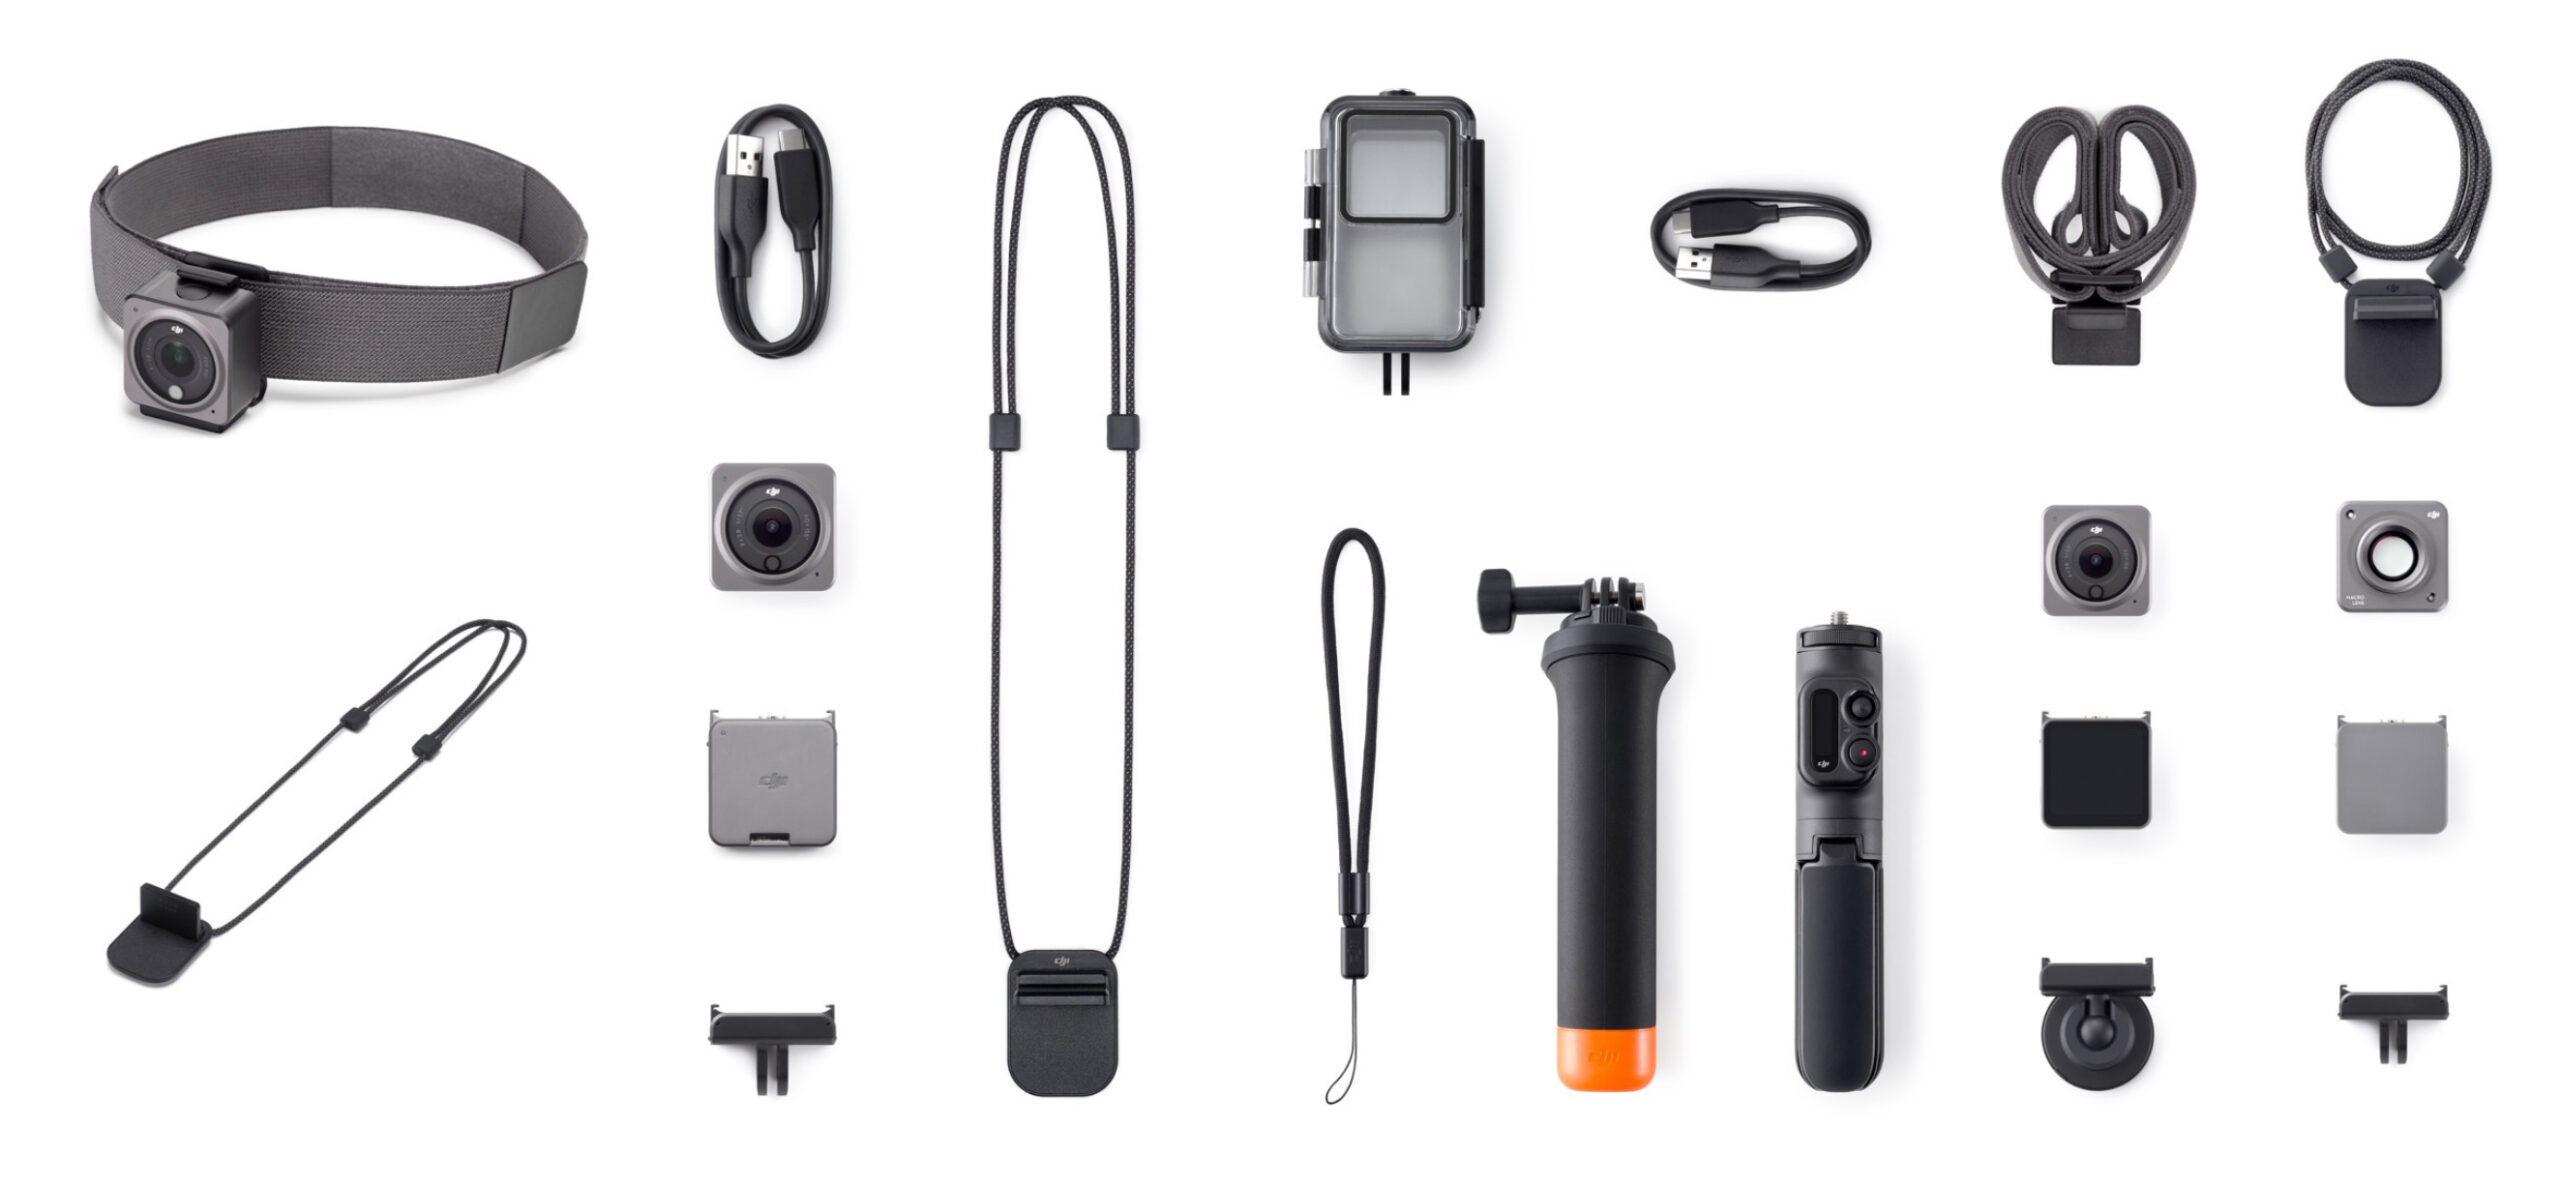 Accessories for the new DJI Action 2 POV camera.